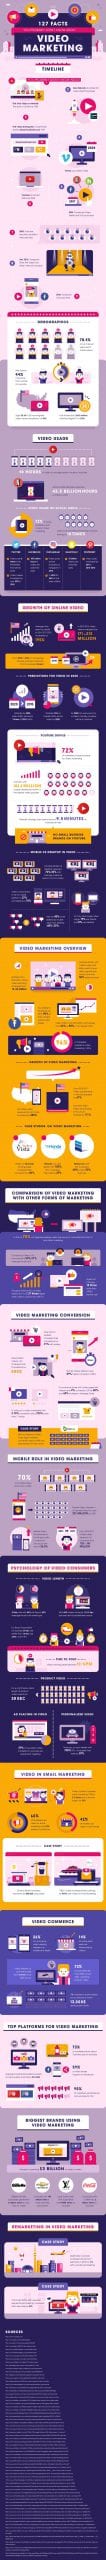 170615-infographic-127-video-marketing-facts-full-jpg